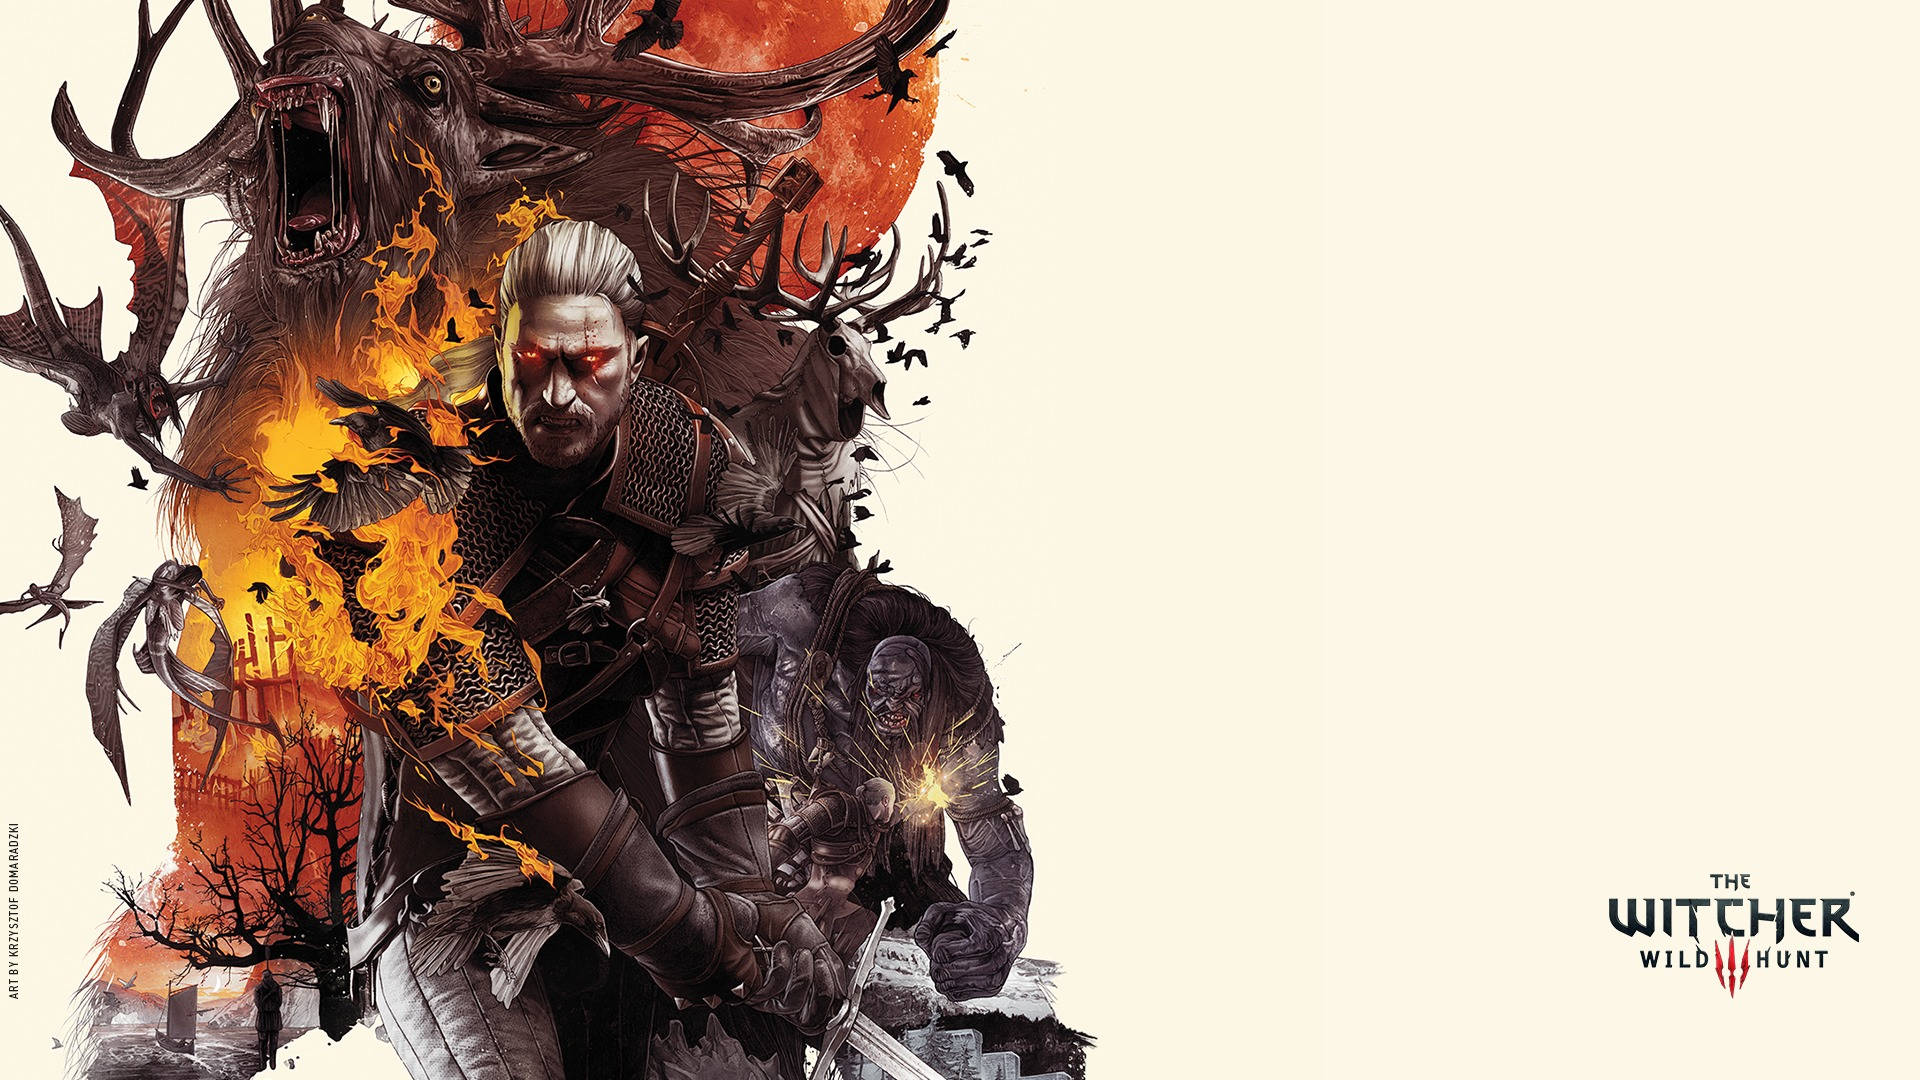 Fight monsters and explore a vibrant world full of magic and danger in The Witcher 3: The Wild Hunt Wallpaper